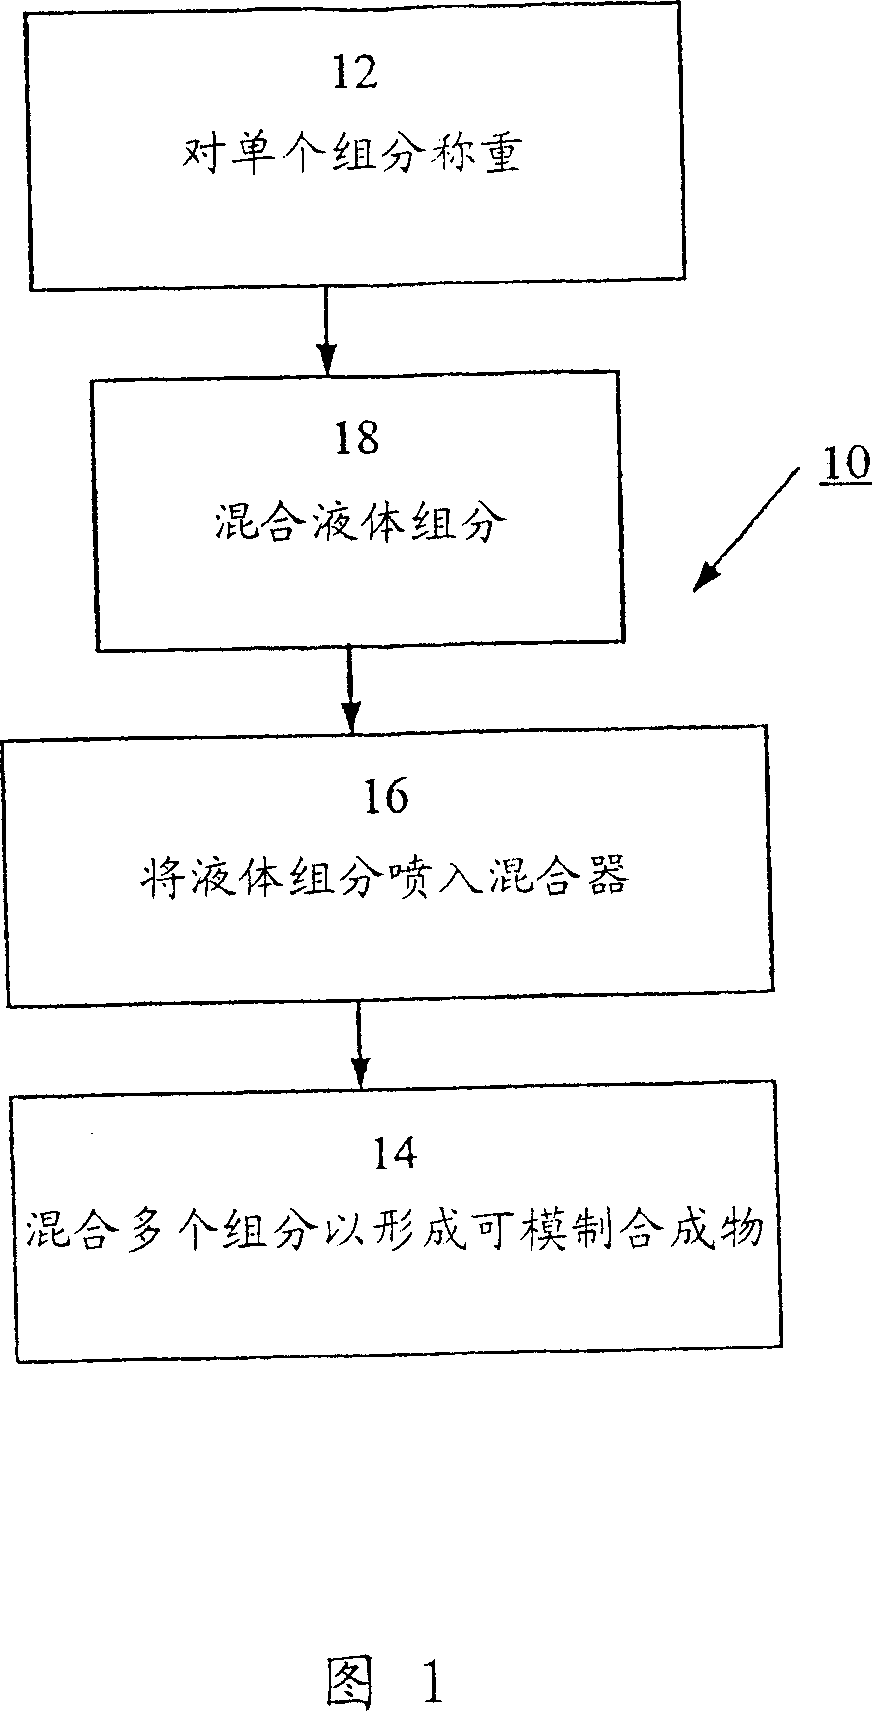 Method for forming high strength mould